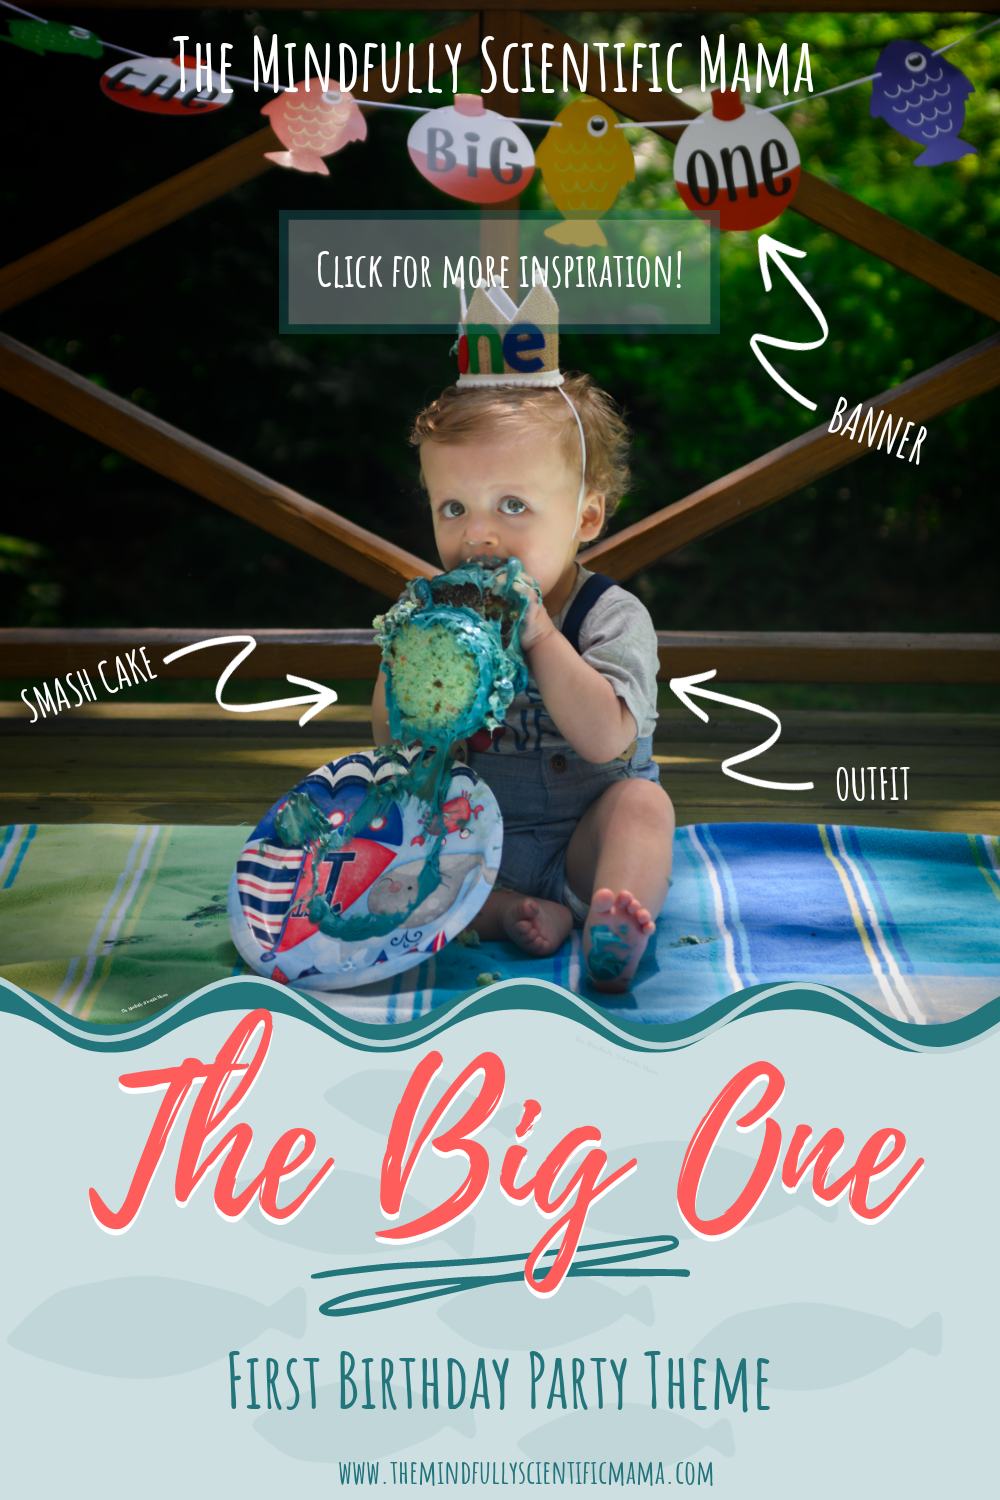  The Big One Fishing Boat High Chair Banner - the Big One Party  Birthday Decorations,1st Birthday Fishing Banner, Fishing Photo Prop, Baby  Fishing Party Decor, Fishing 1st Birthday Party Decorations 